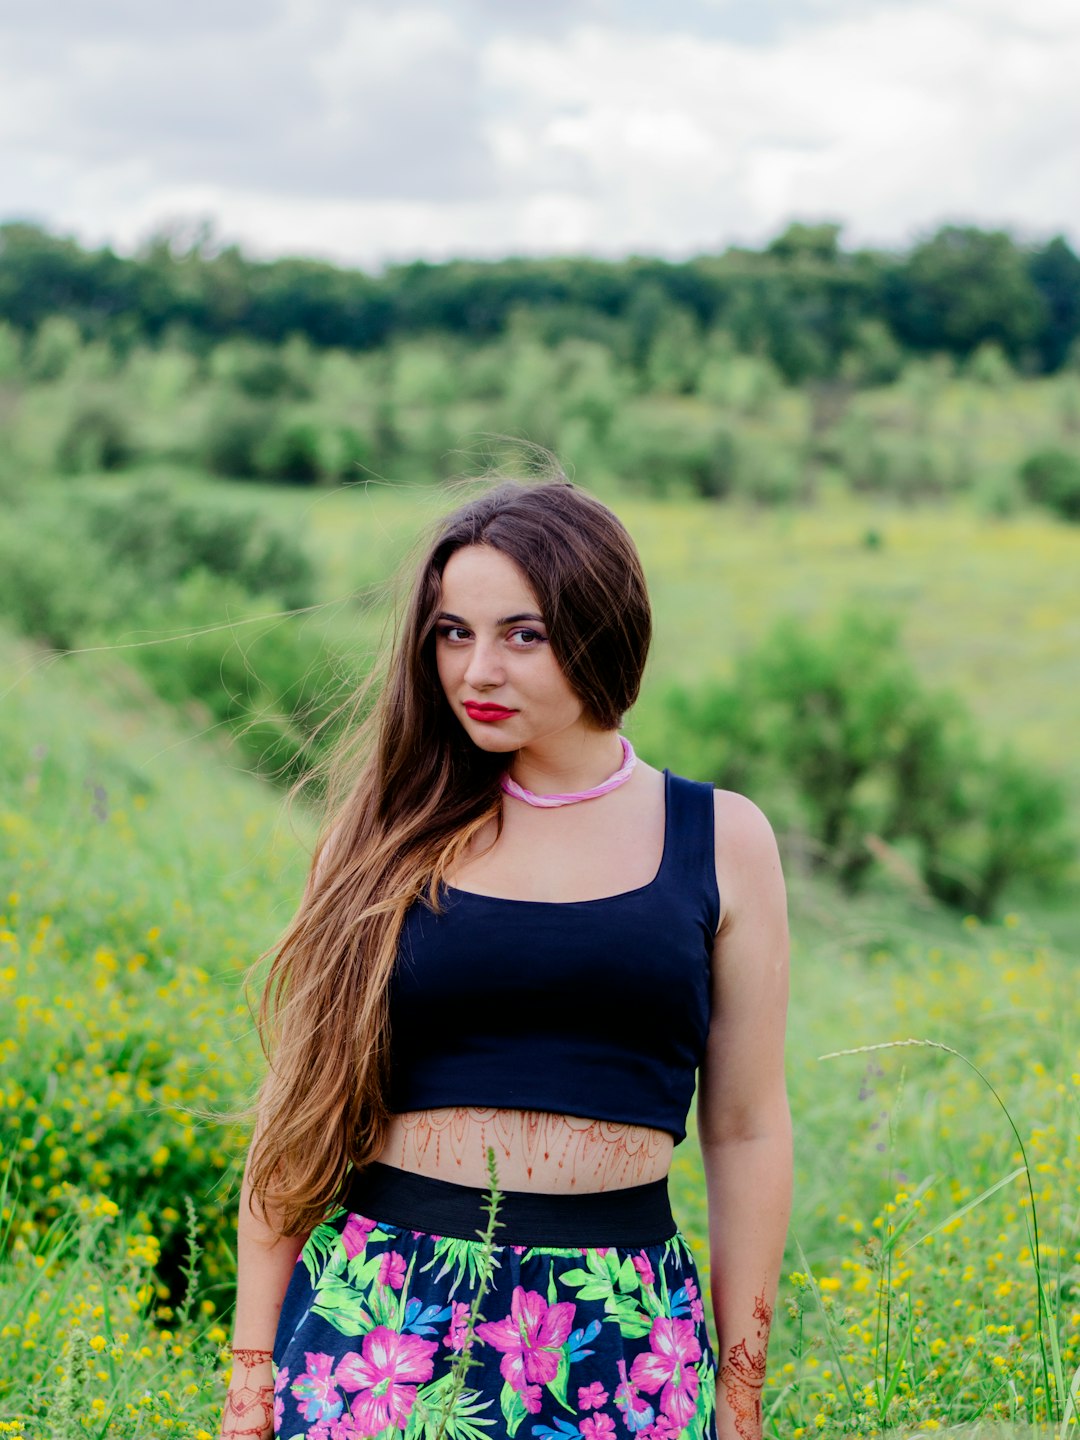 woman in blue tank top standing on green grass field during daytime